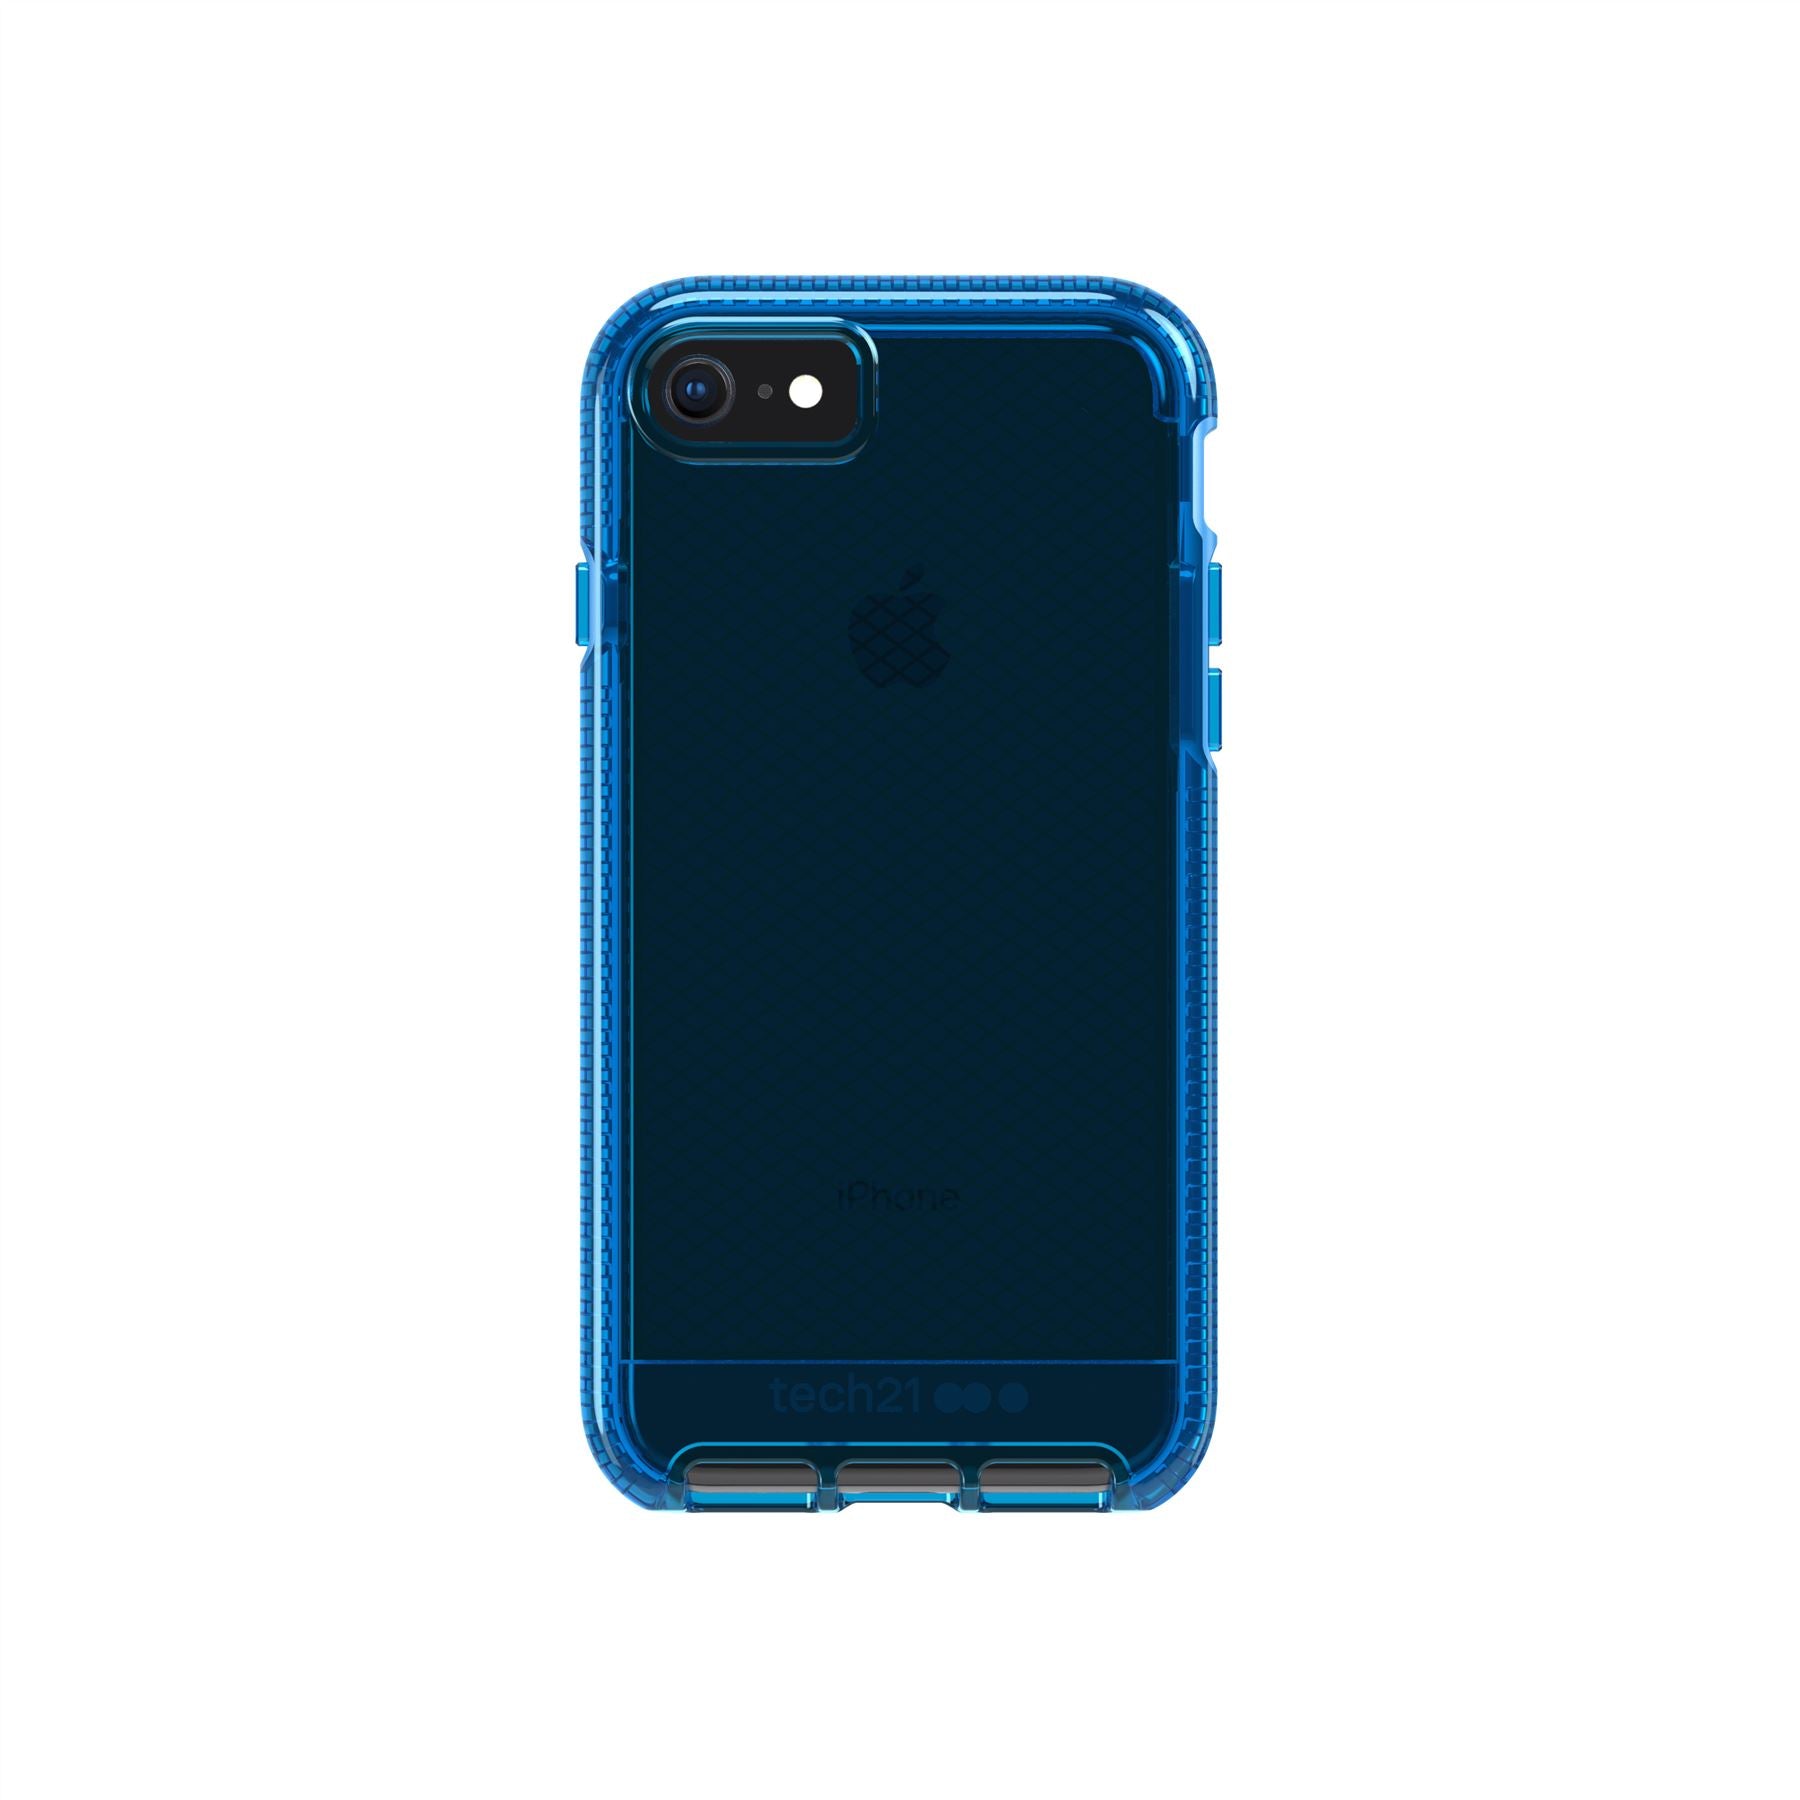 Hervat kever mosterd Evo Check - Apple iPhone SE 2022 Case - Classic Blue | Tech21 - US